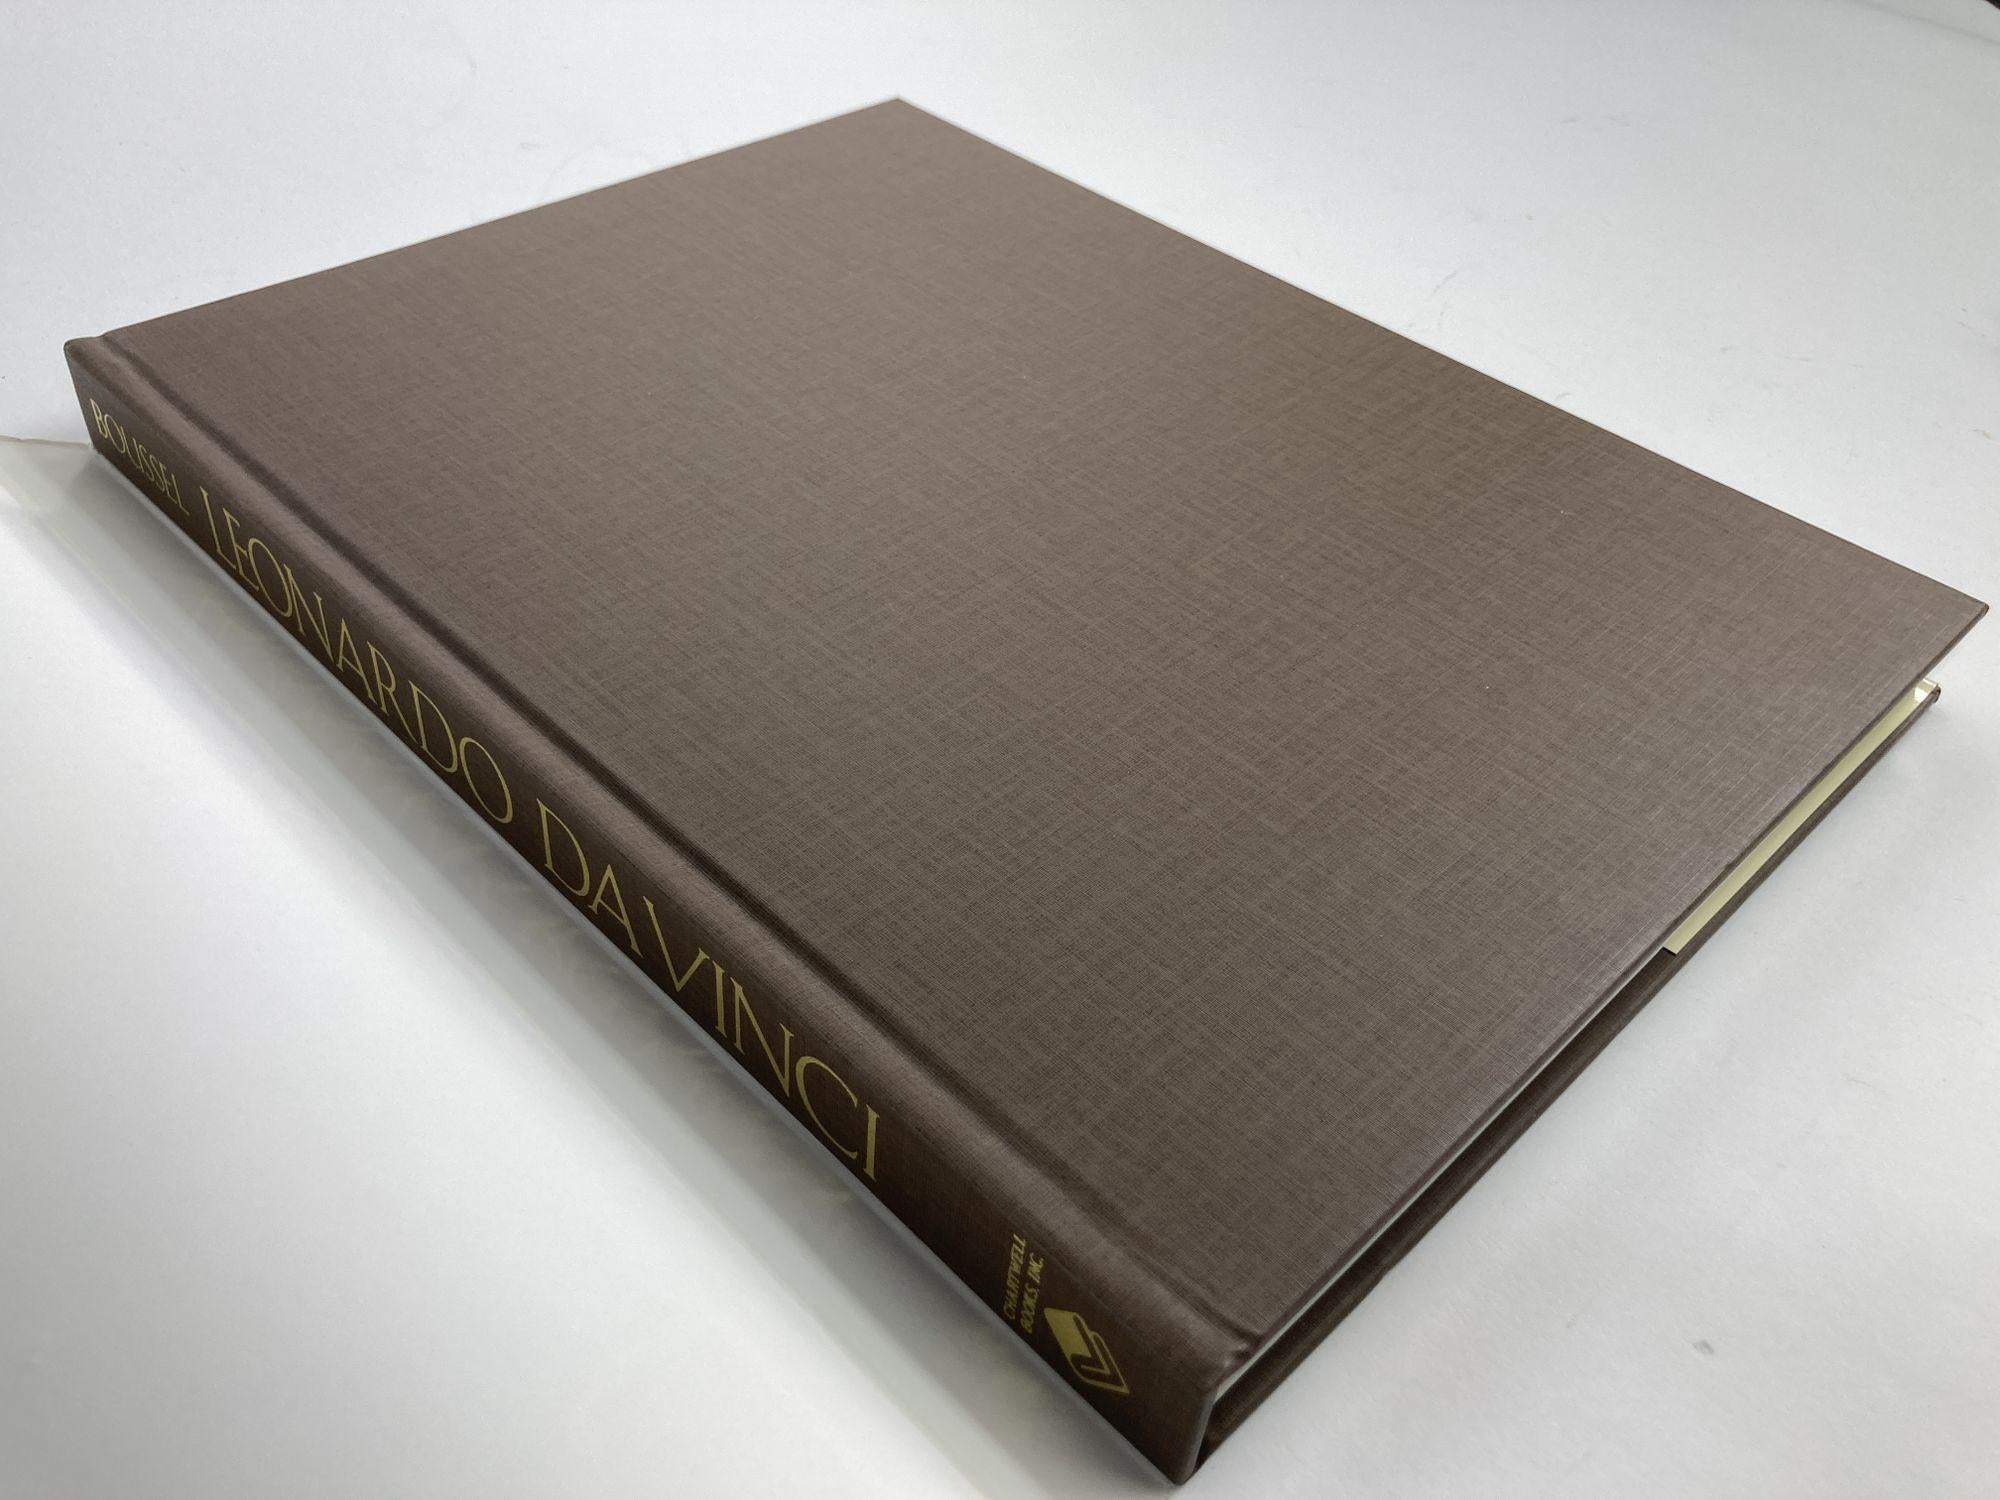 Leonardo Da Vinci Hardcover Book by Patrice Boussel In Good Condition For Sale In North Hollywood, CA